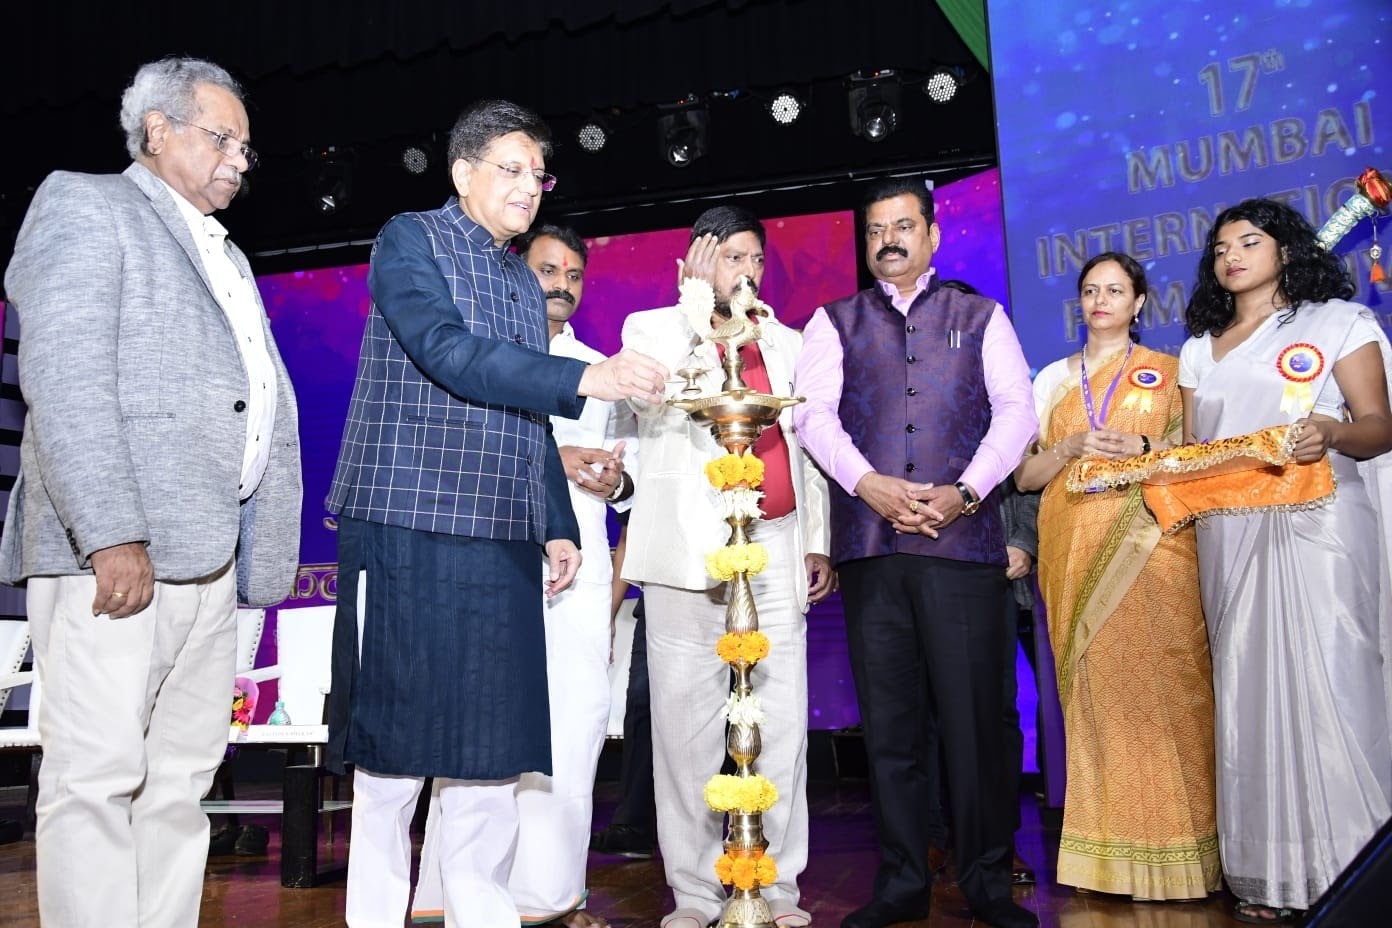 Mumbai International Film Festival begins with a colourful opening ceremony